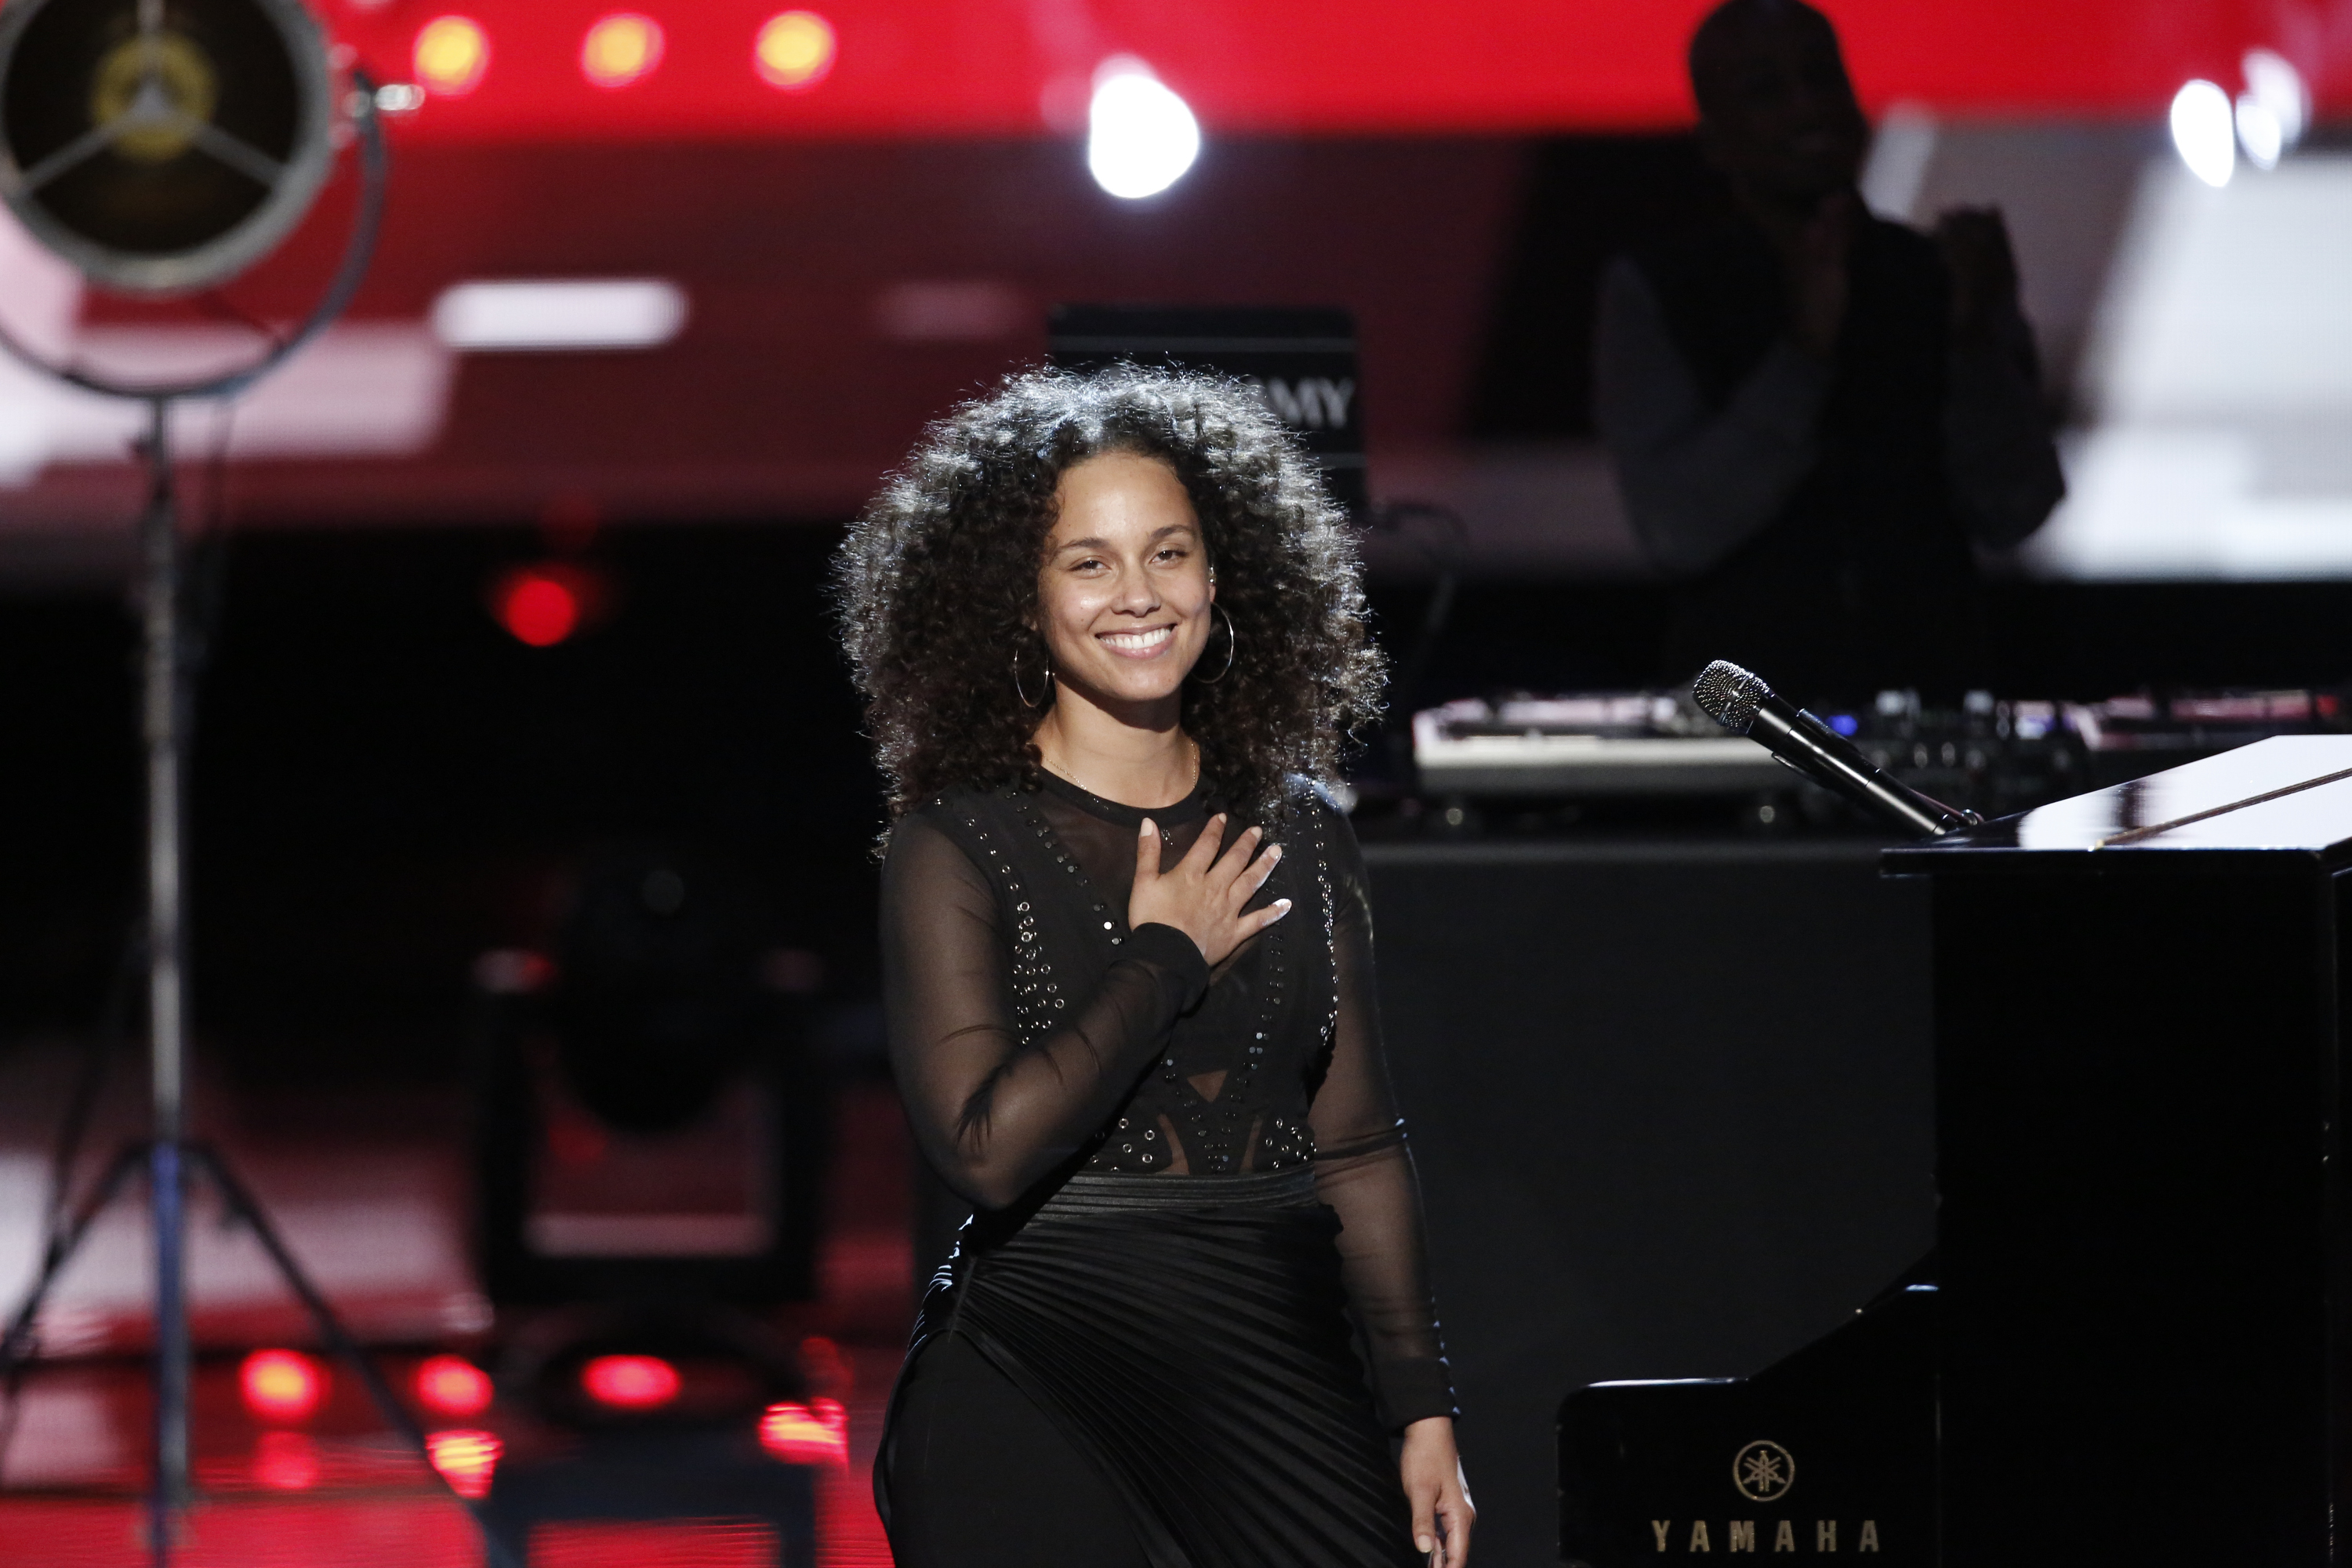 THE VOICE -- "Live Top 12" Episode 1114B -- Pictured: Alicia Keys -- (Photo by: Tyler Golden/NBC/NBCU Photo Bank via Getty Images) (Tyler Golden&mdash;NBCU Photo Bank/Getty Images)